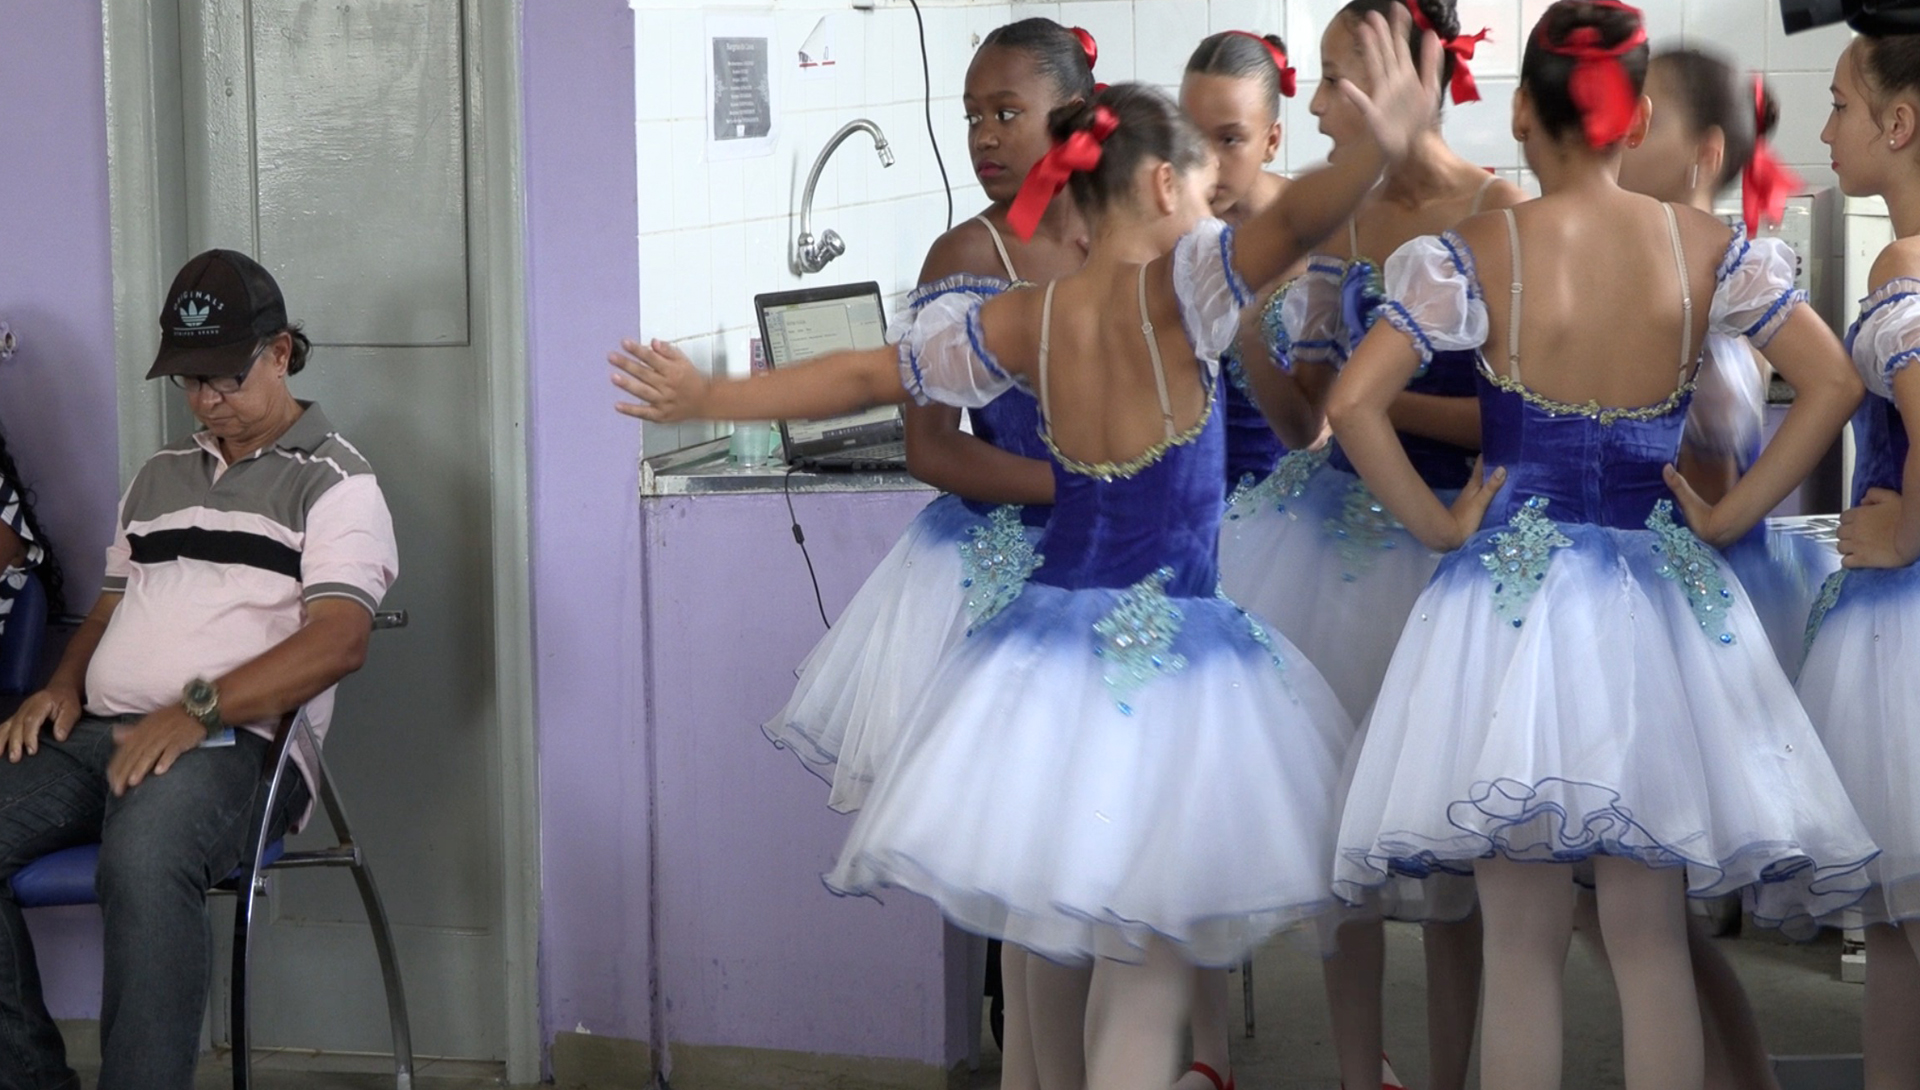 A shot from the film, showing ballerinas.